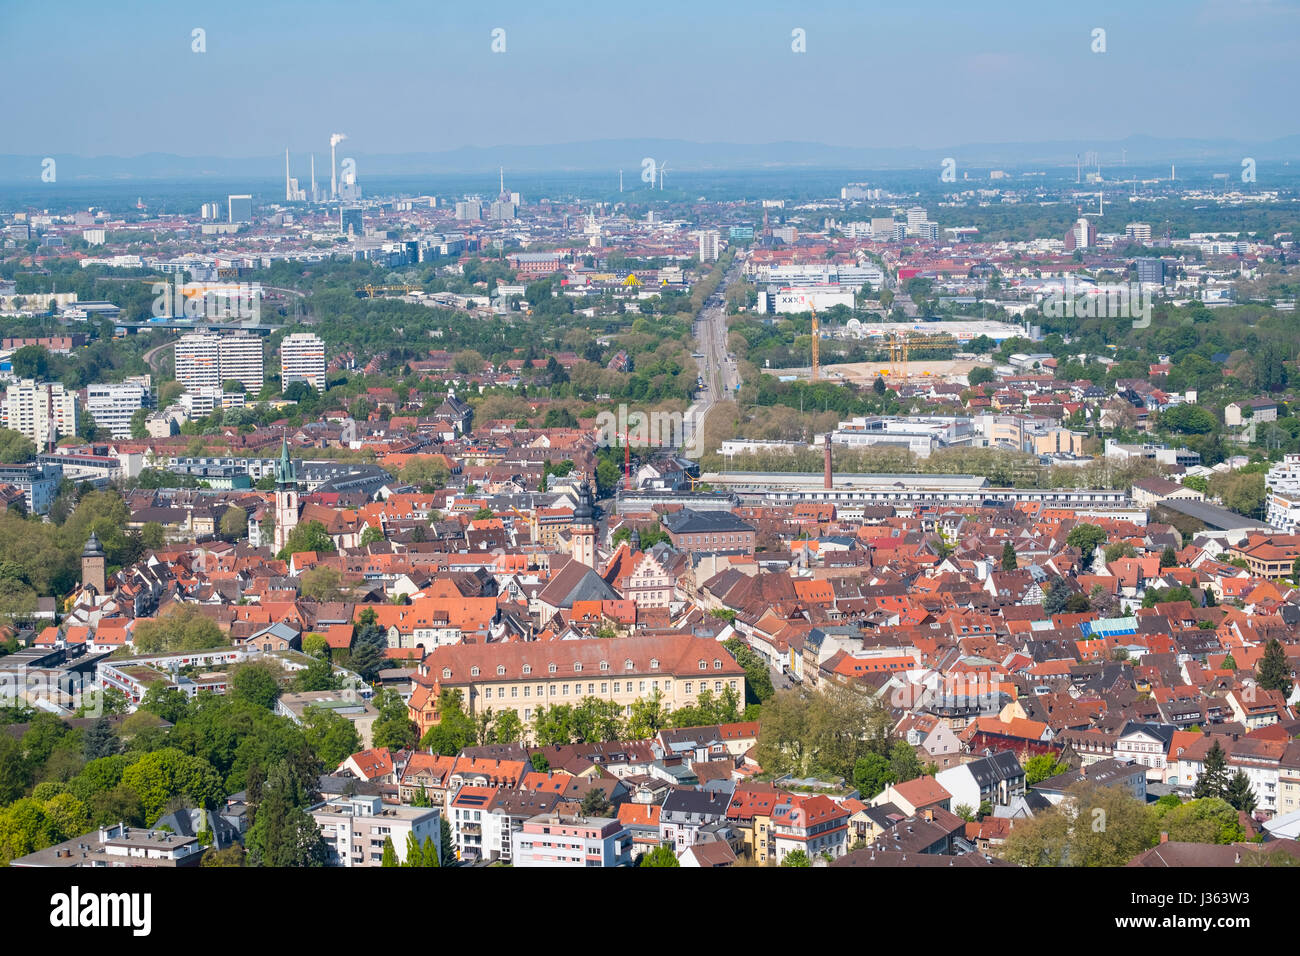 View over city of Karlsruhe from Turmberg hill in Germany Stock Photo